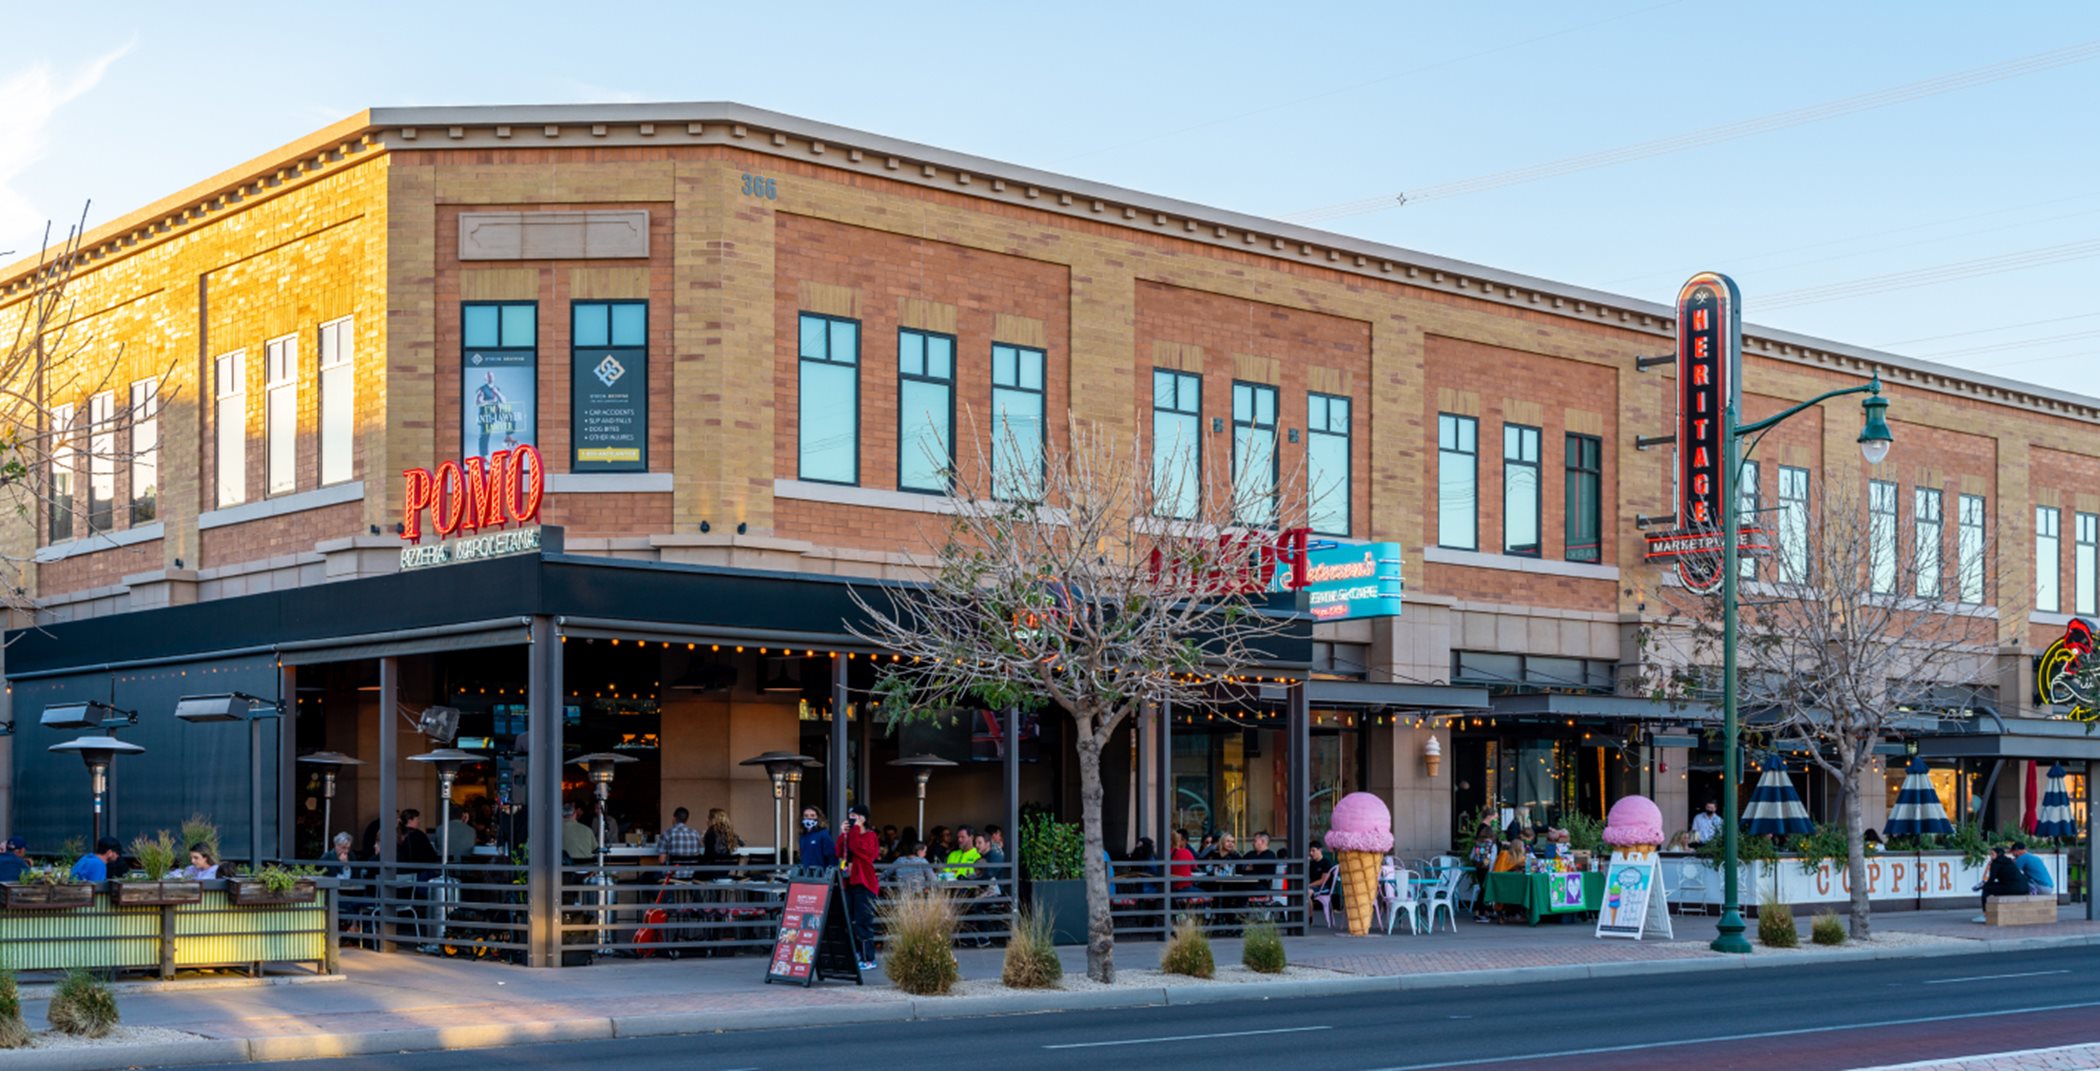 Image of Pomo, a restaurant in Downtown Gilbert